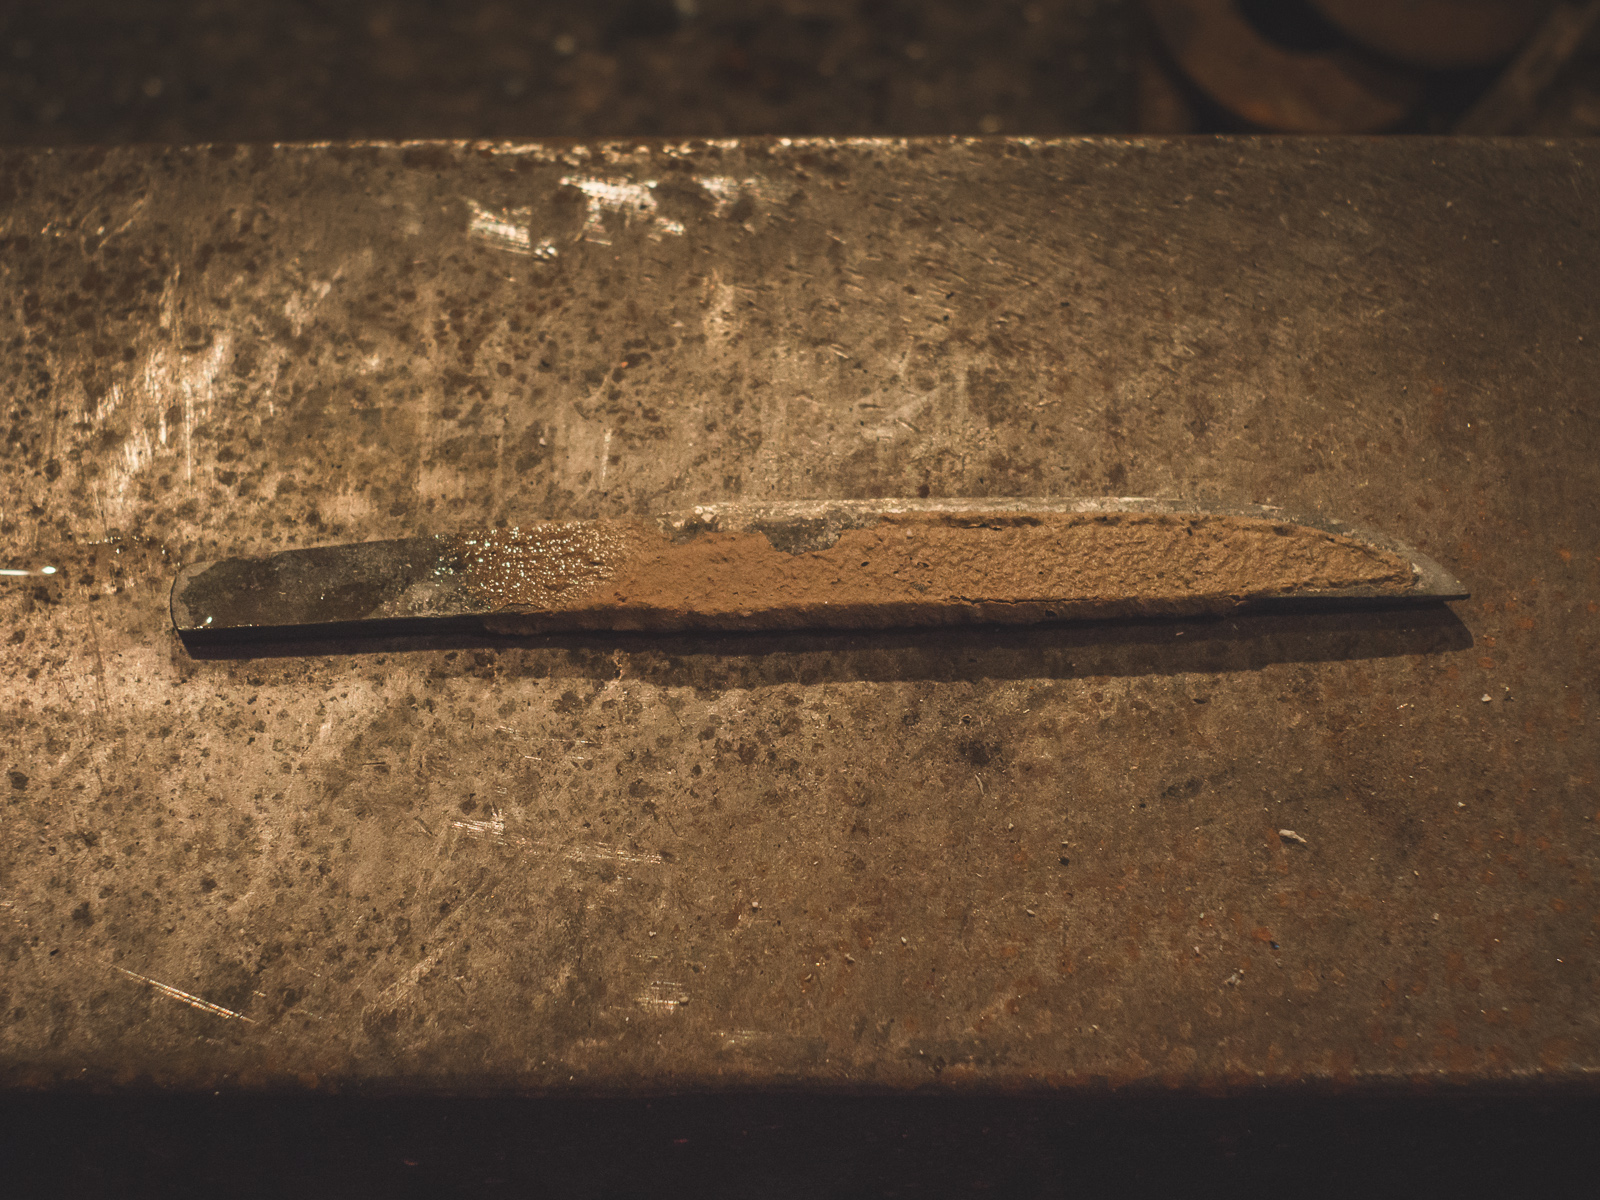 Island Blacksmith: Charcoal forged knives reclaimed from reclaimed shear steel.